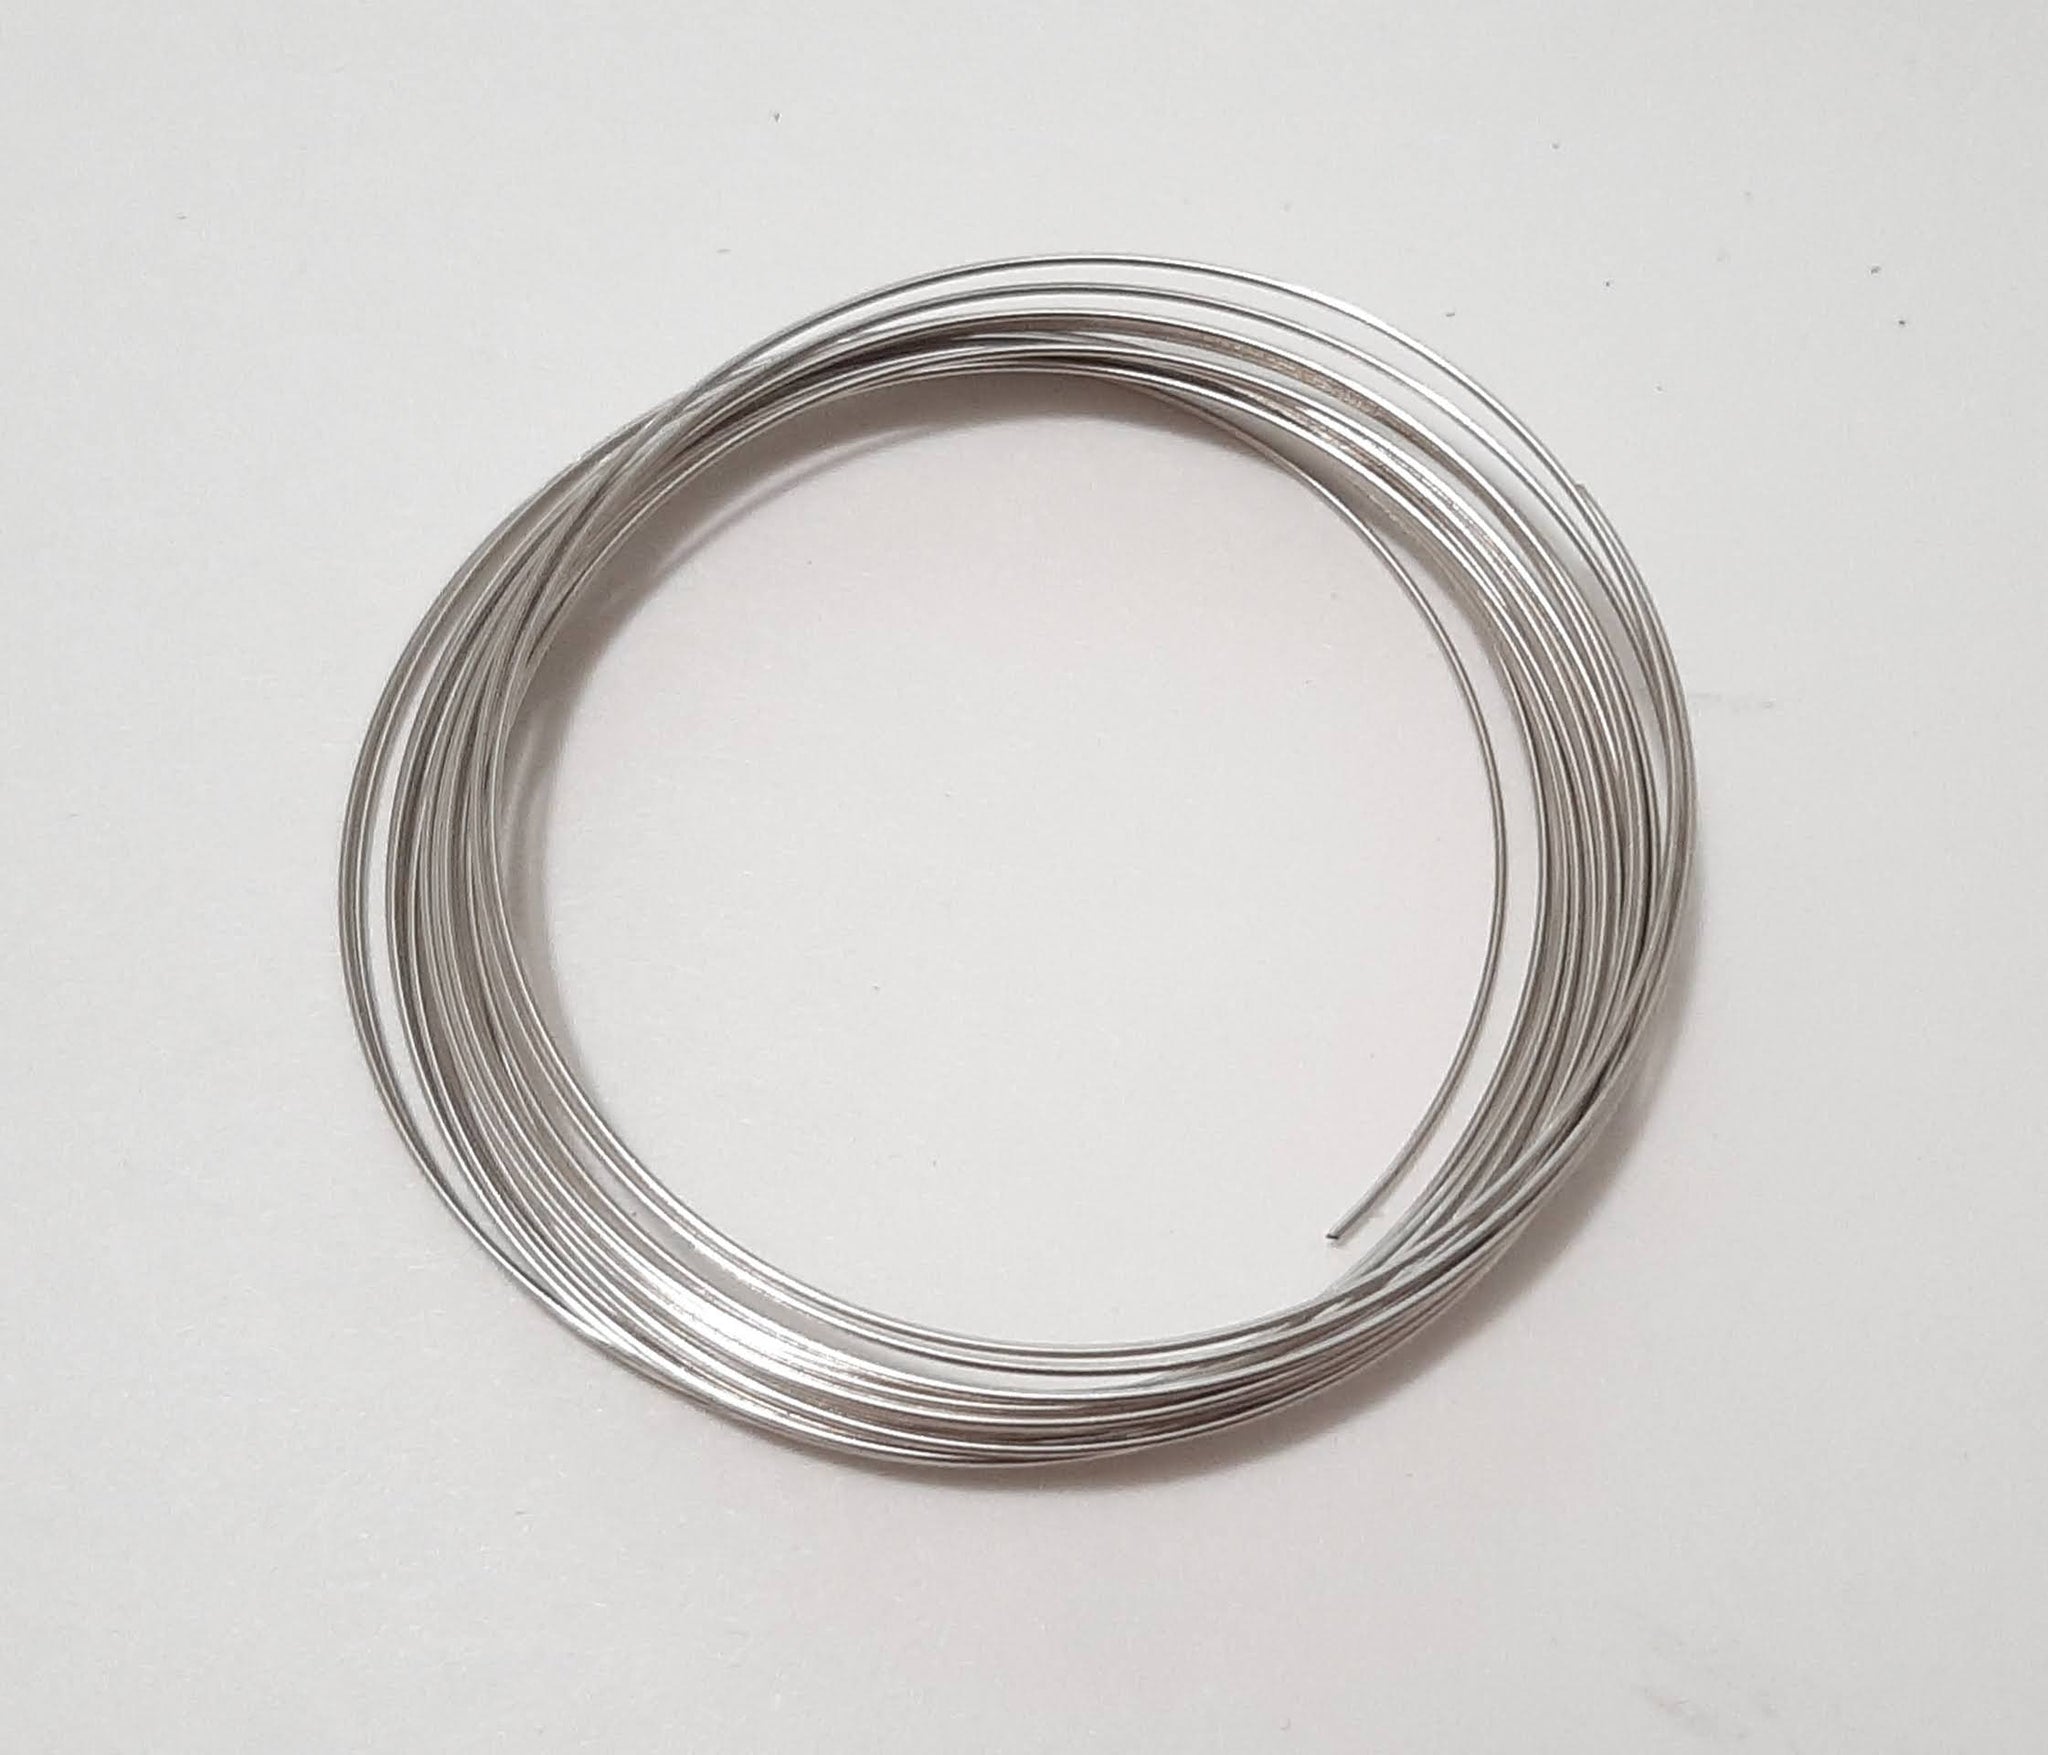 20 Loops of Stainless Steel Memory Wire for Making Beaded Bracelets